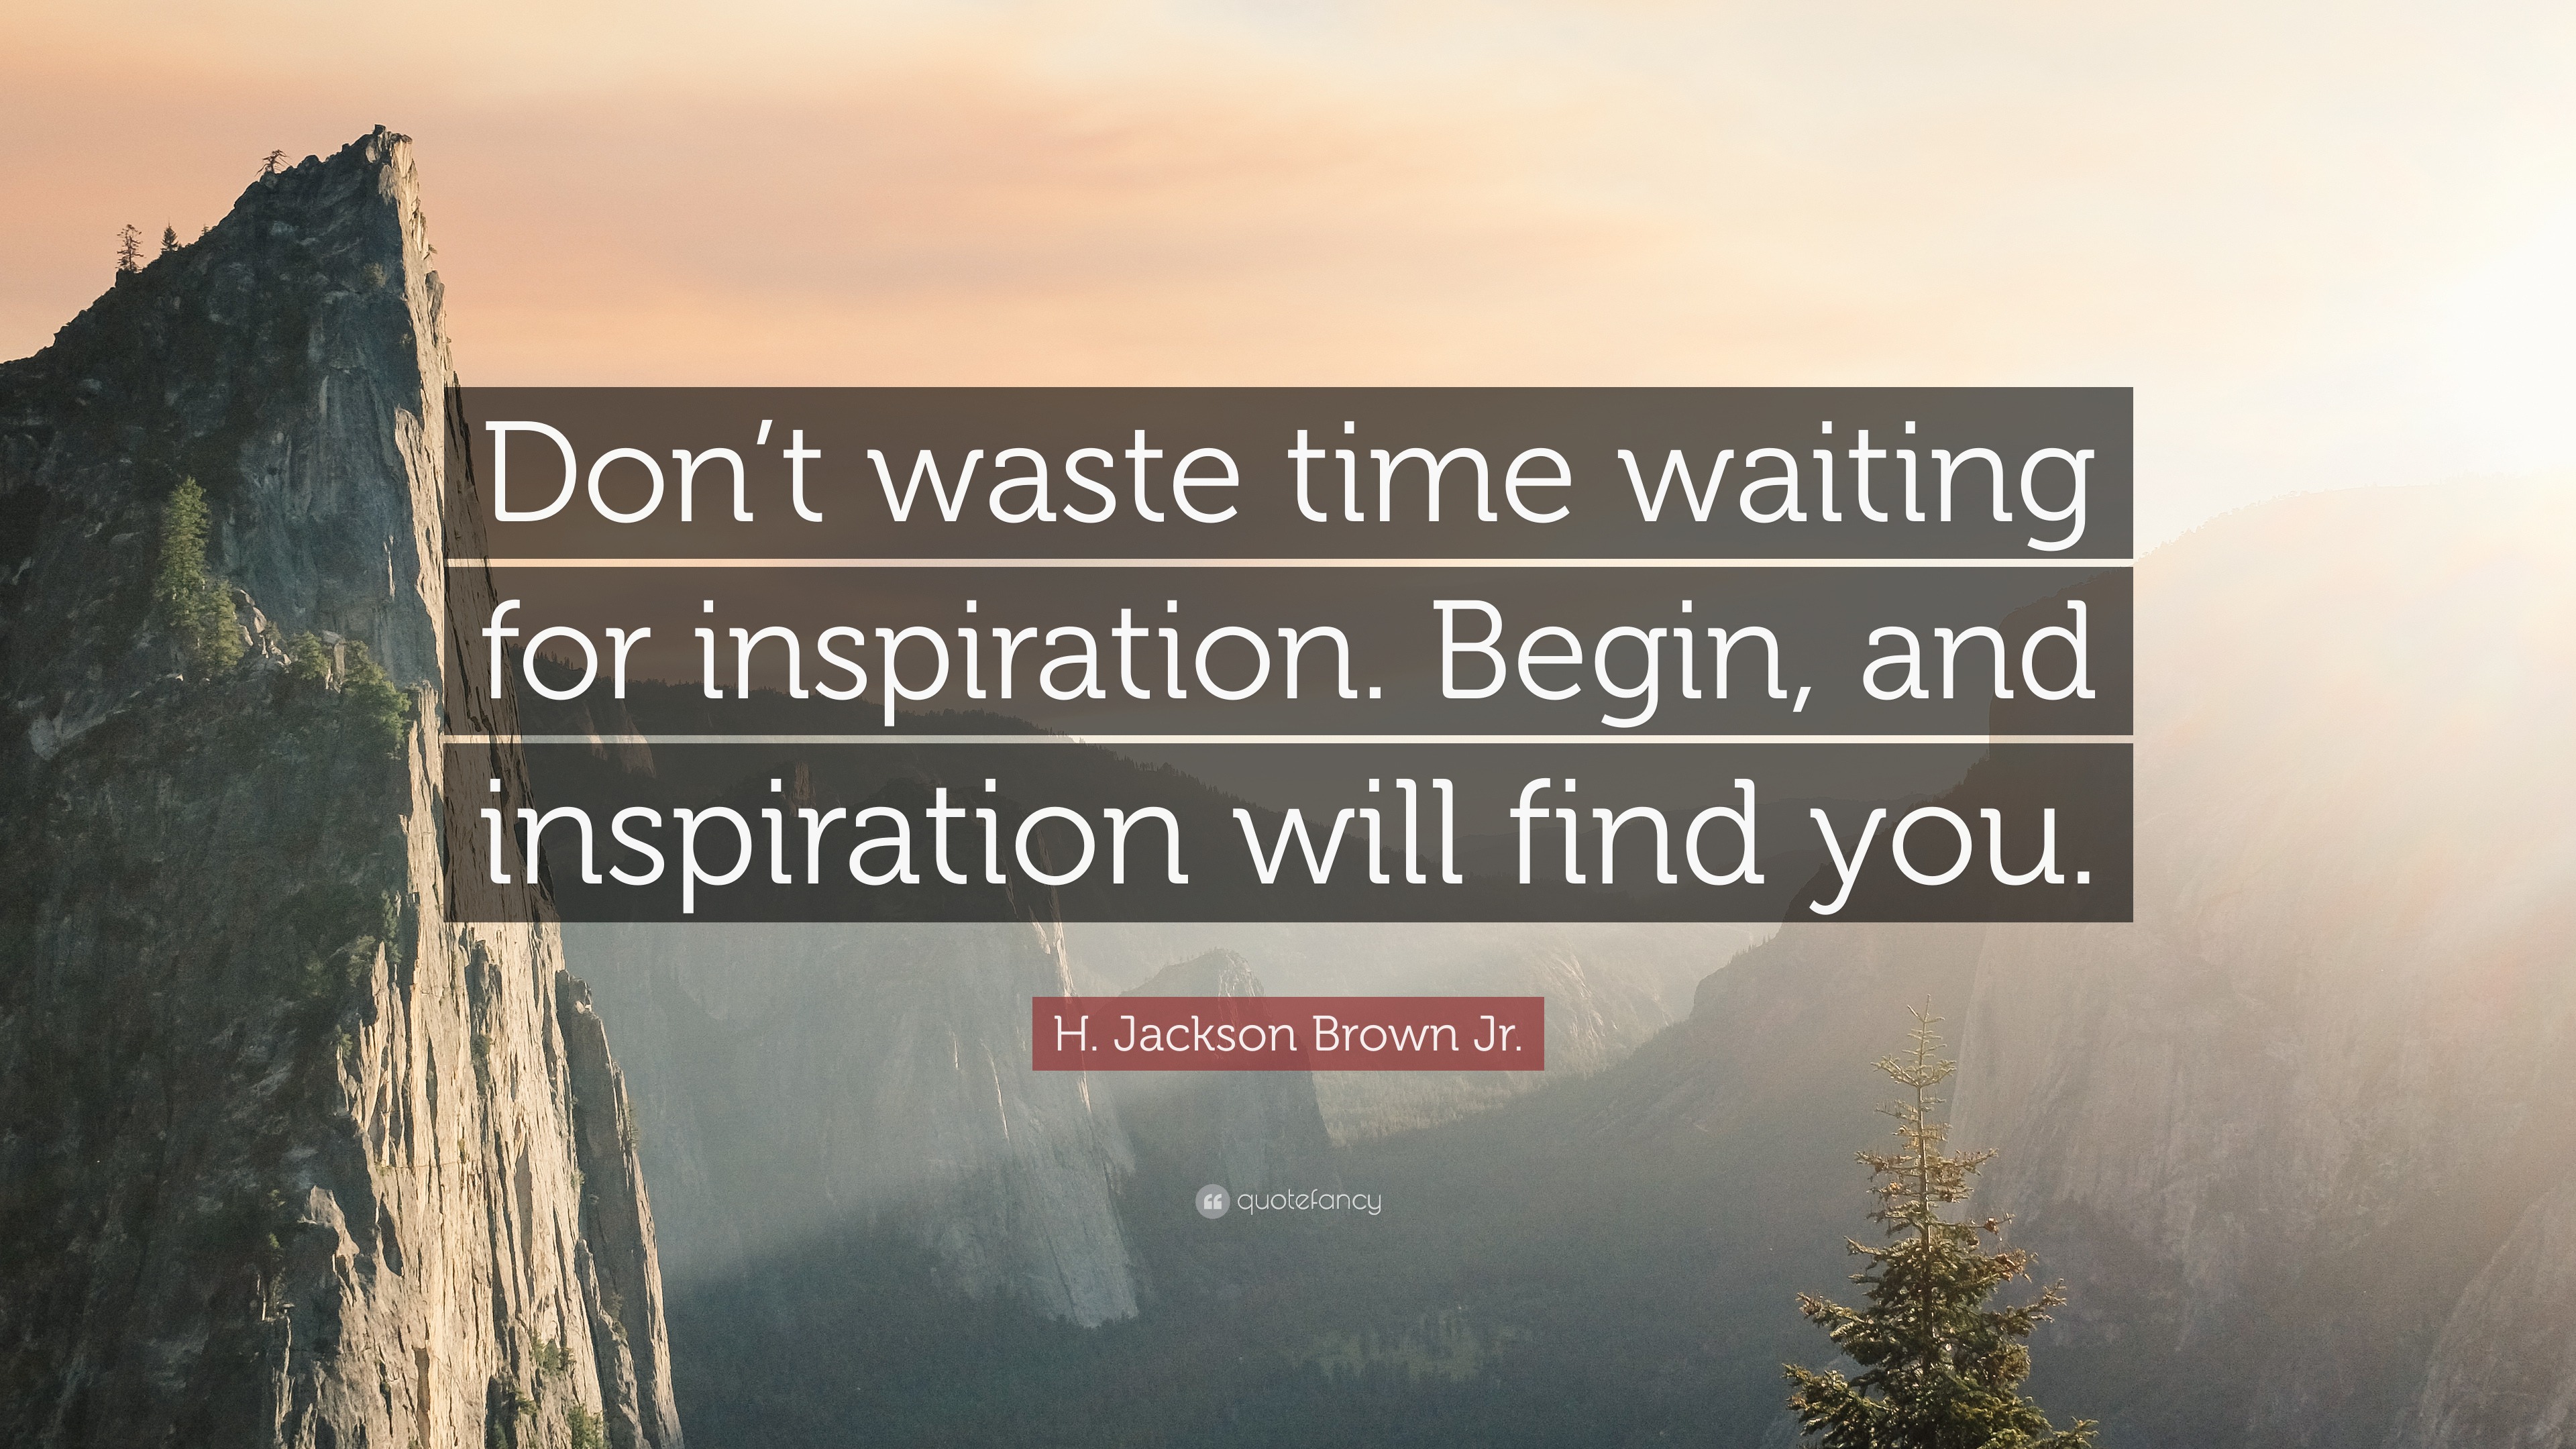 H. Jackson Brown Jr. Quote: “Don’t waste time waiting for inspiration